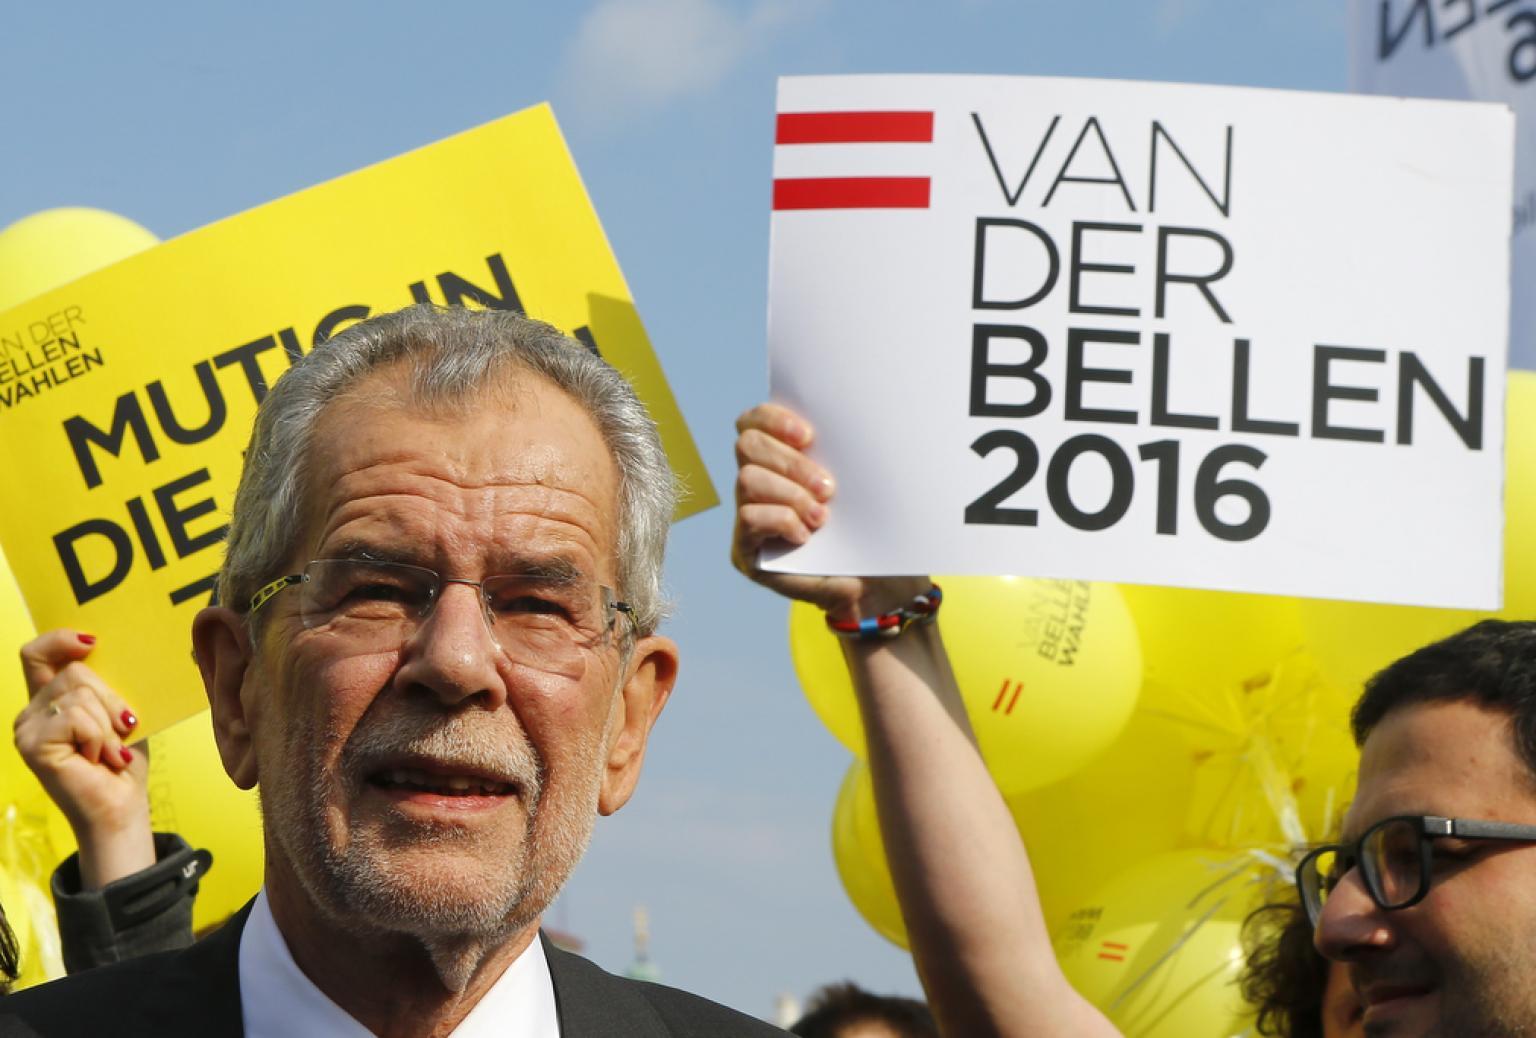 Alexander Van der Bellen, a former leader of the leftist Greens party now running as an independent, arrives for his final election rally ahead of Austrian presidential election in Vienna, Austria, on May 20, 2016.